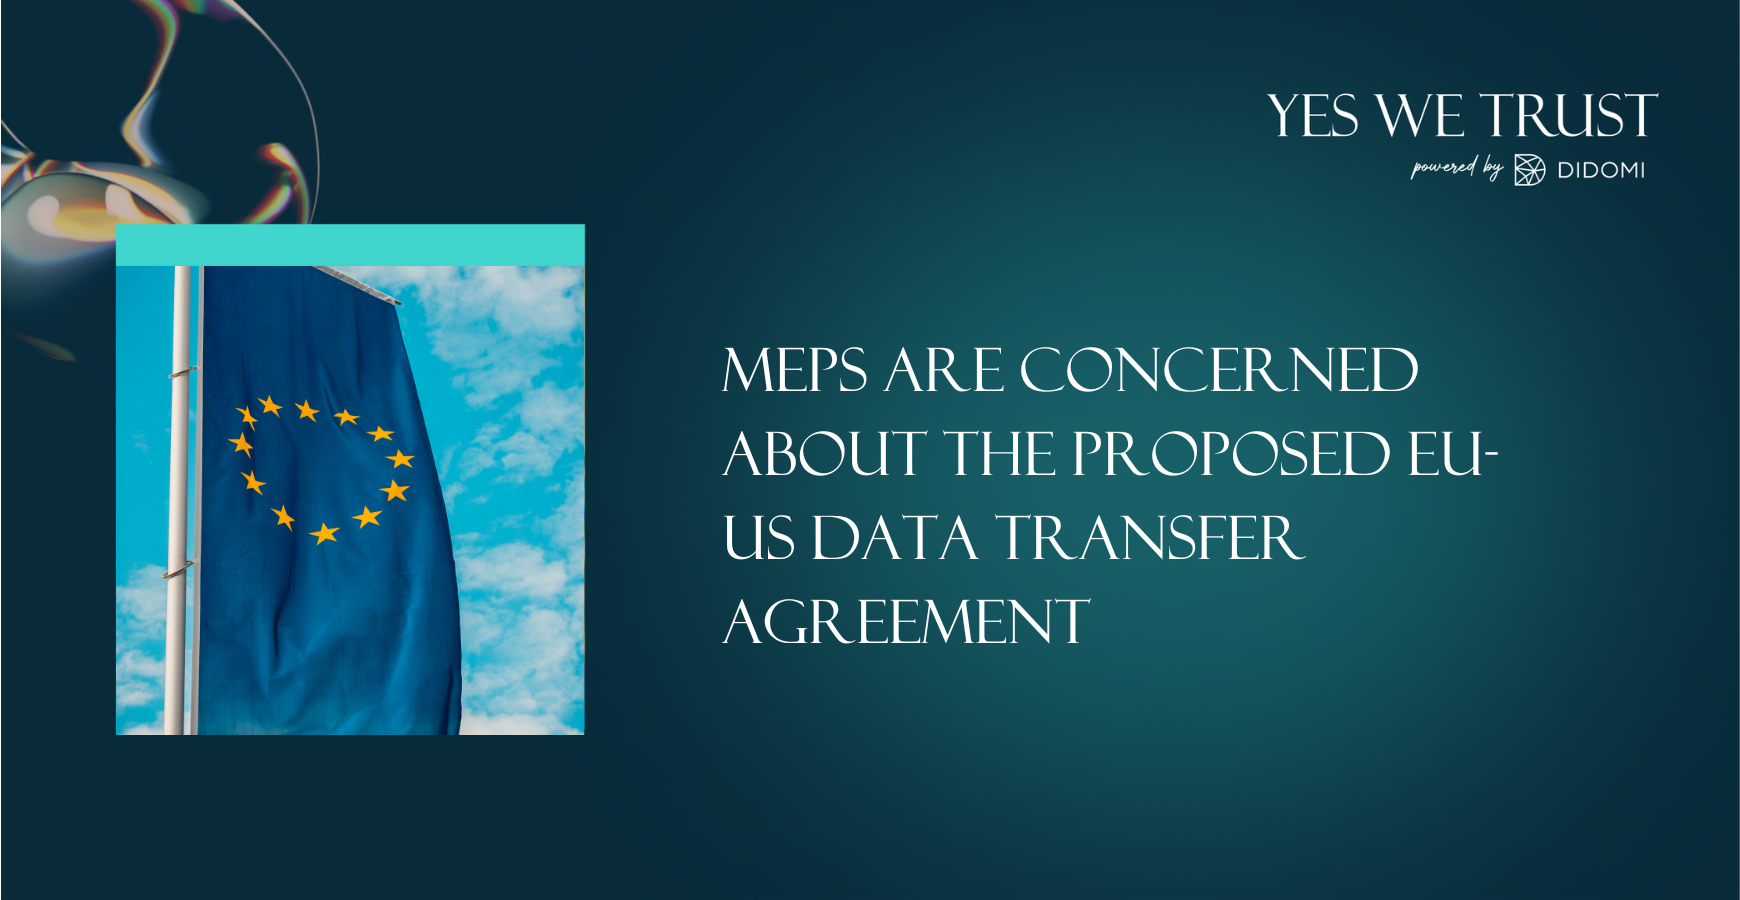 MEPs are concerned about the proposed EU-US data transfer agreement